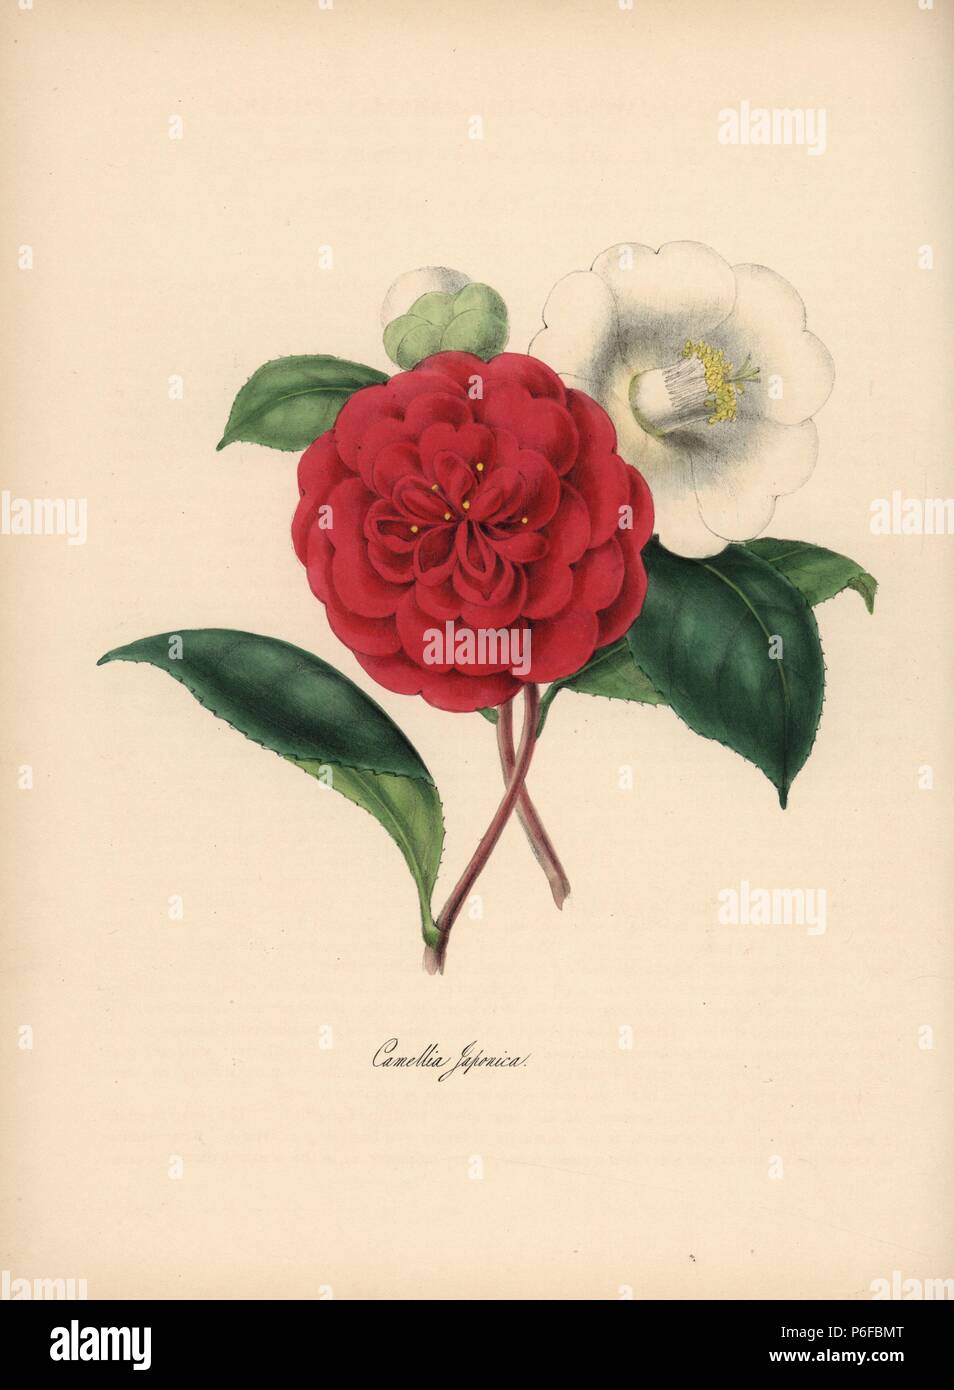 Japanese camellia, Camellia japonica. Handcoloured zincograph by C. Chabot drawn by Miss M. A. Burnett from her 'Plantae Utiliores: or Illustrations of Useful Plants,' Whittaker, London, 1842. Miss Burnett drew the botanical illustrations, but the text was chiefly by her late brother, British botanist Gilbert Thomas Burnett (1800-1835). Stock Photo